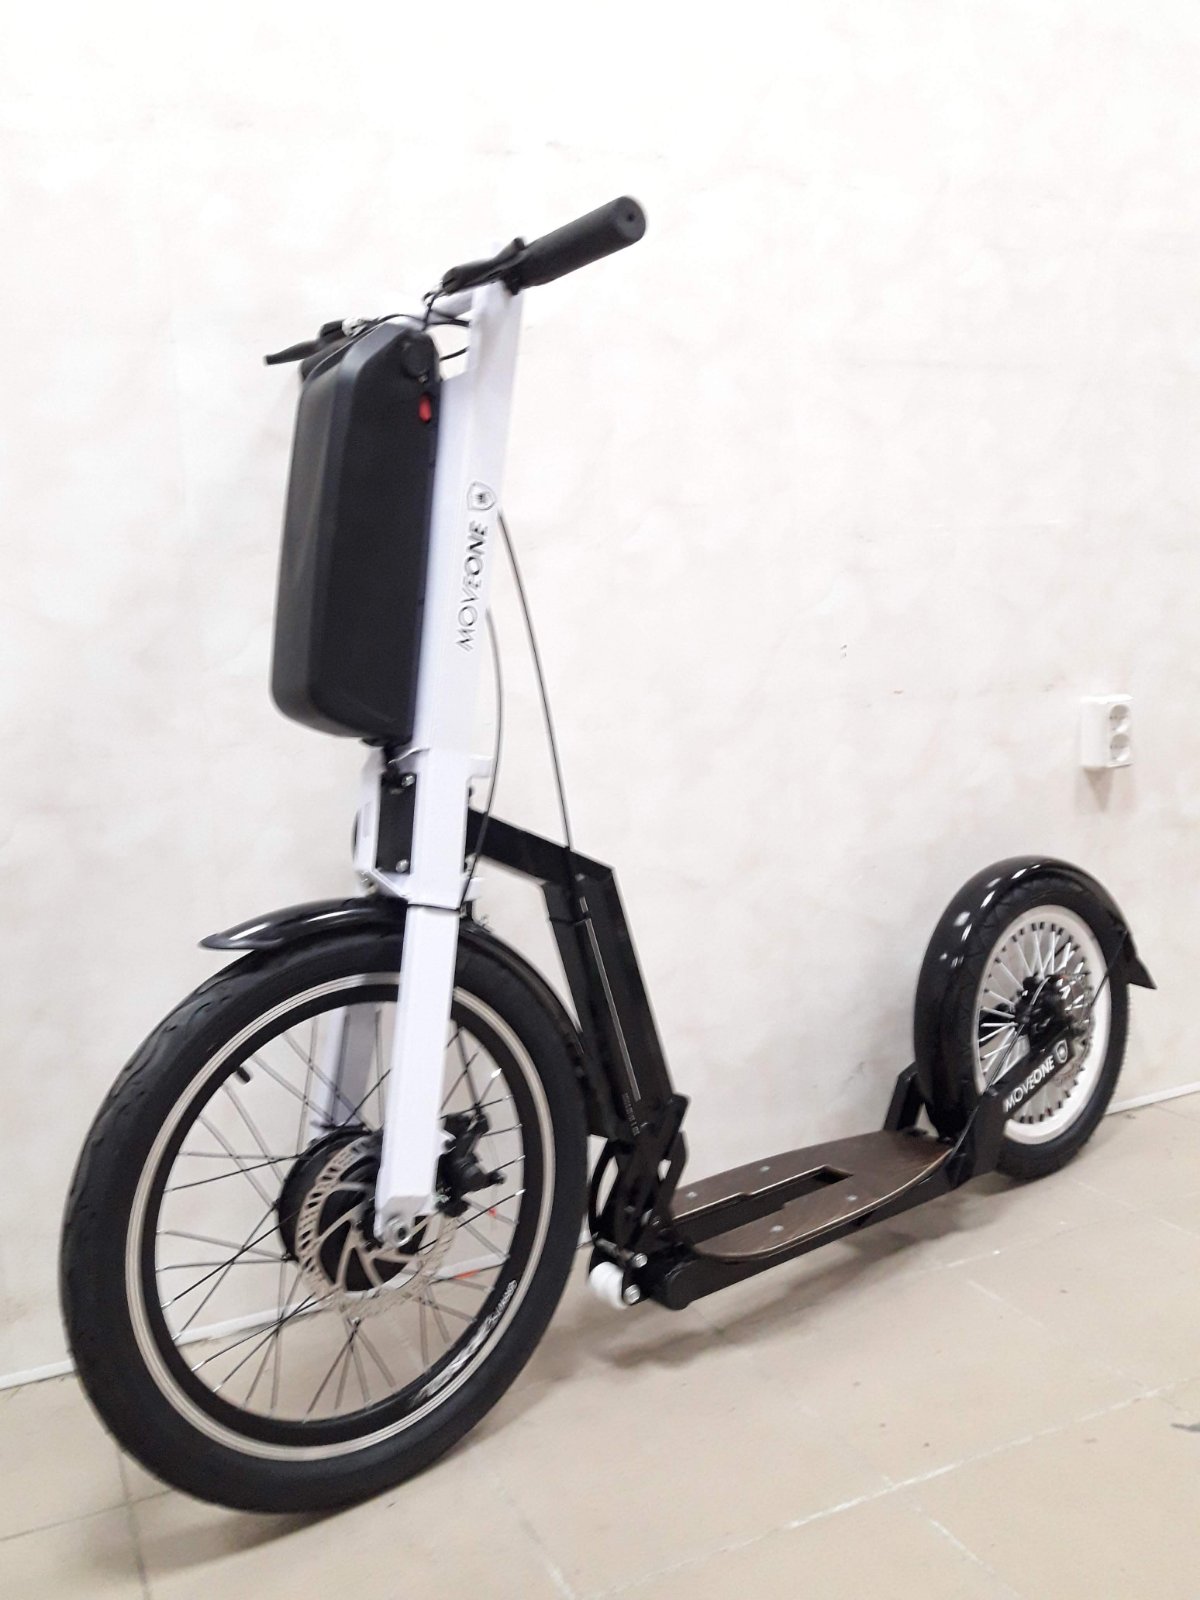 Expansion of production of Ukrainian electric scooters MoveOne